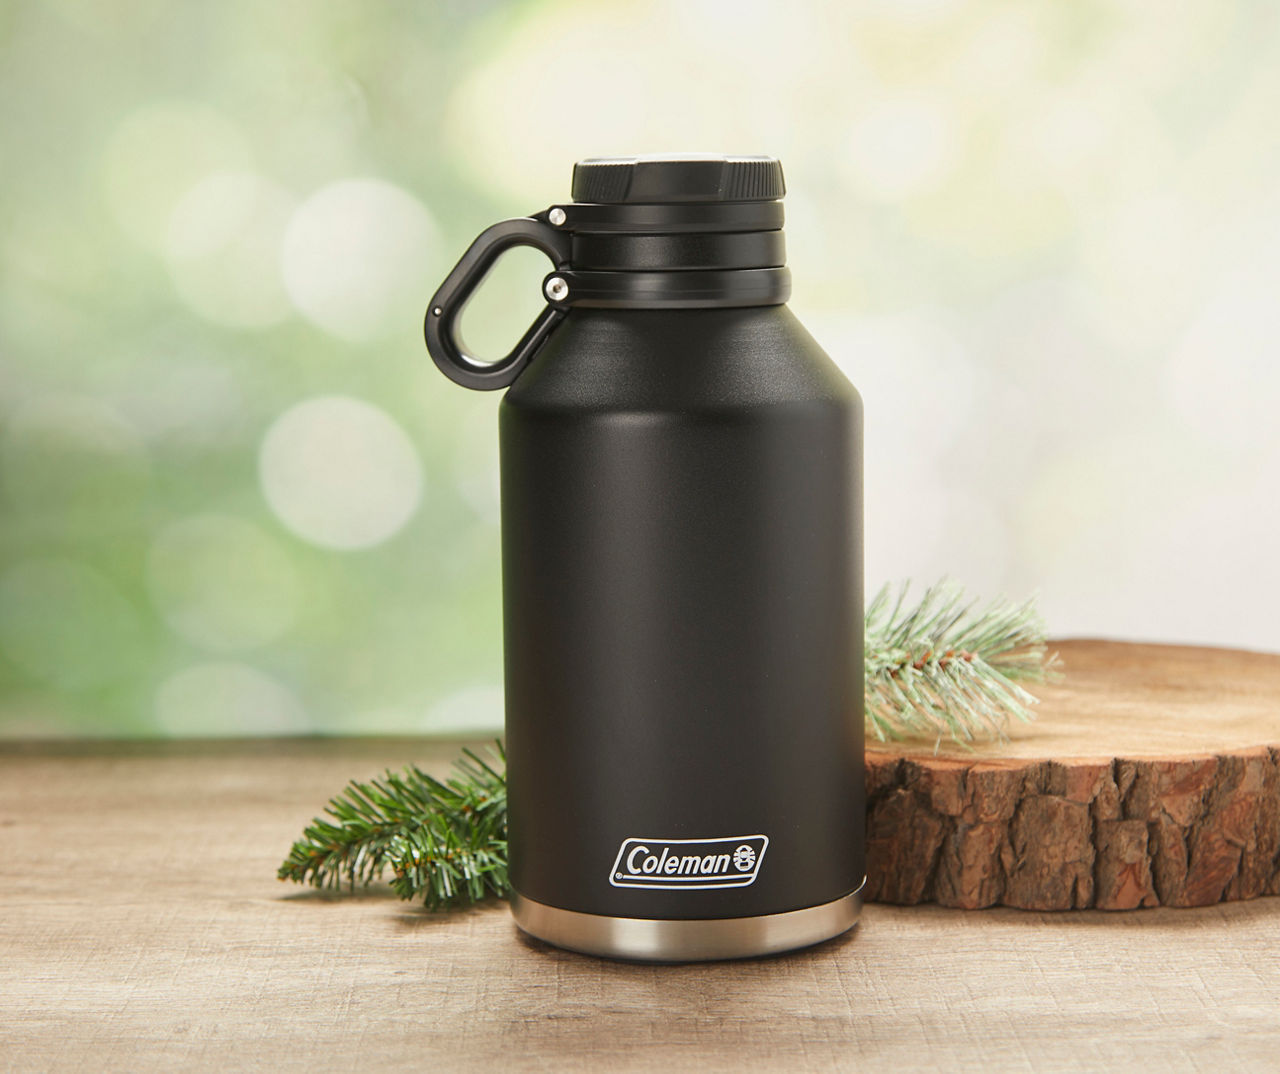  Coleman 64oz Vacuum-Insulated Stainless Steel Growler, Keeps  Drinks Hot Up to 41 Hours or Cold Up to 76 Hours, Great for Water, Coffee,  Beer, & More : Home & Kitchen